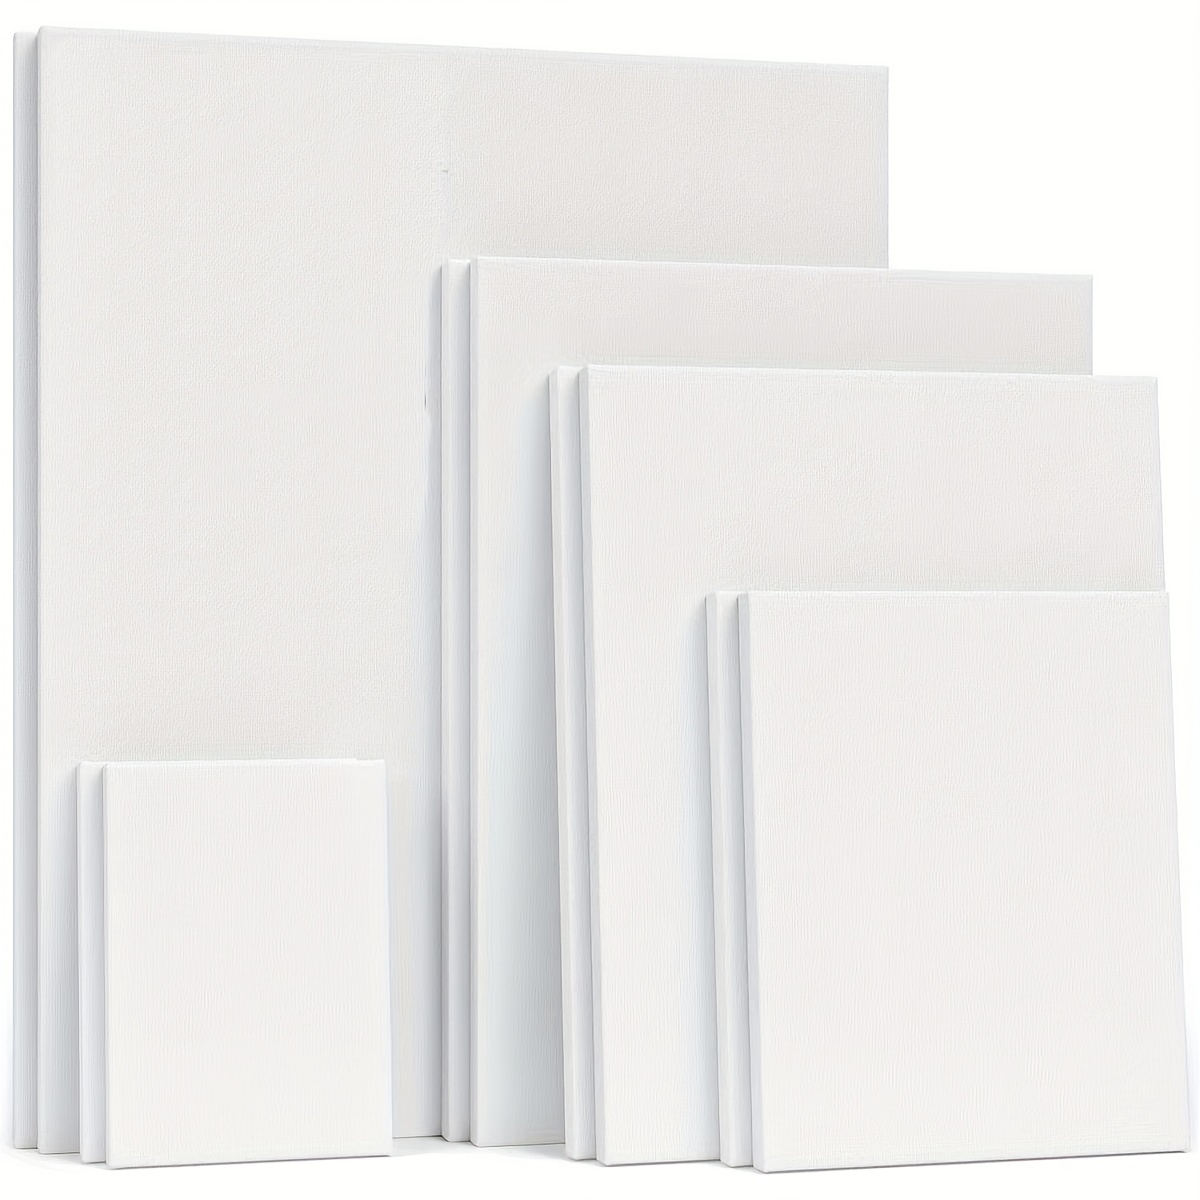 18 x 24 inch Stretched Canvas 12-Ounce Triple Primed, 18-Pack -  Professional Artist Quality White Blank 3/4 Profile, 100% Cotton,  Heavy-Weight Gesso